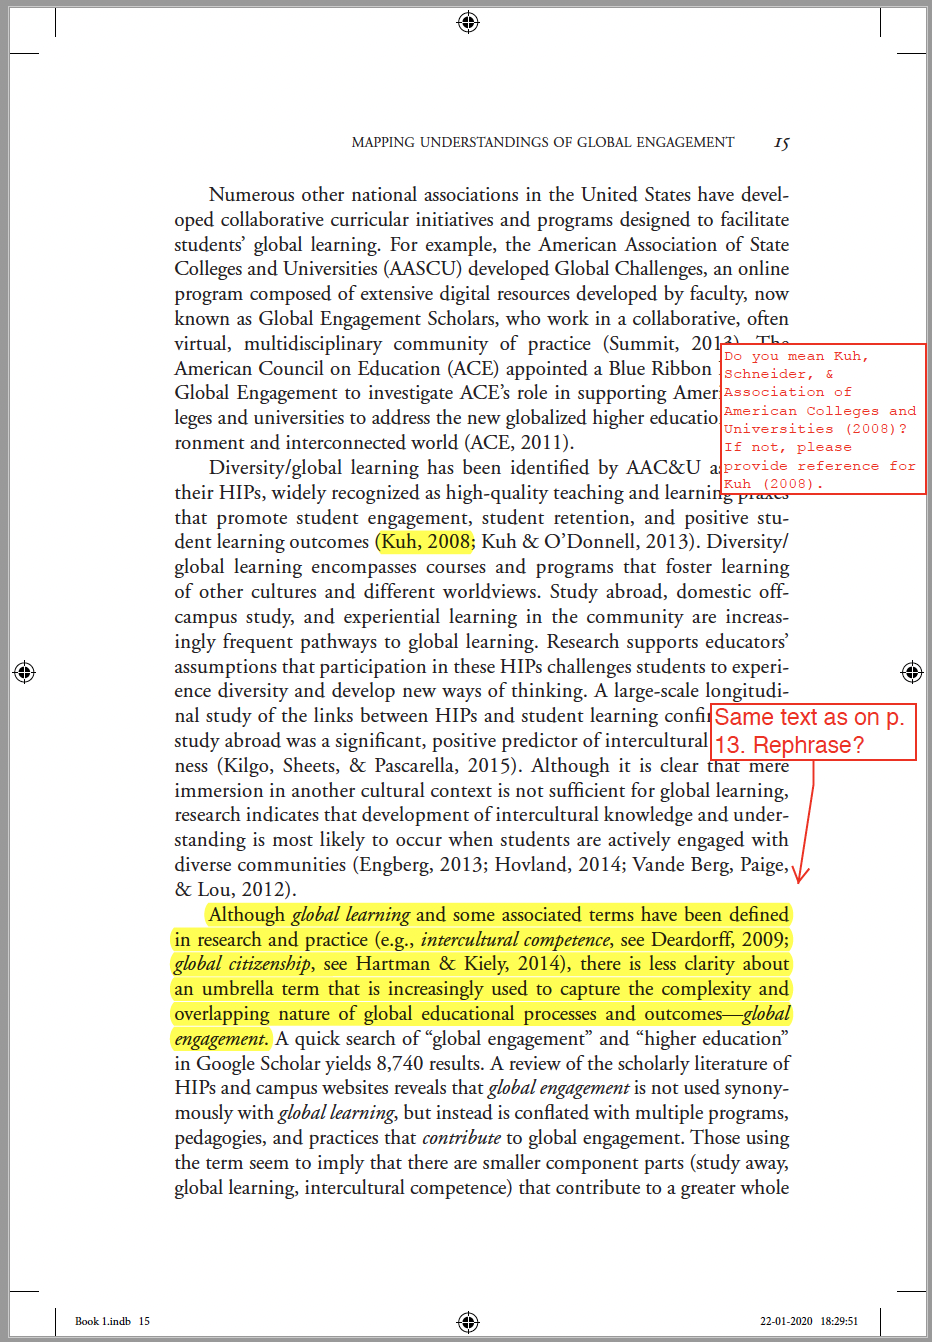 Page proofs of Page 15 of "Mind the Gap" that show queries as PDF comments and highlighting